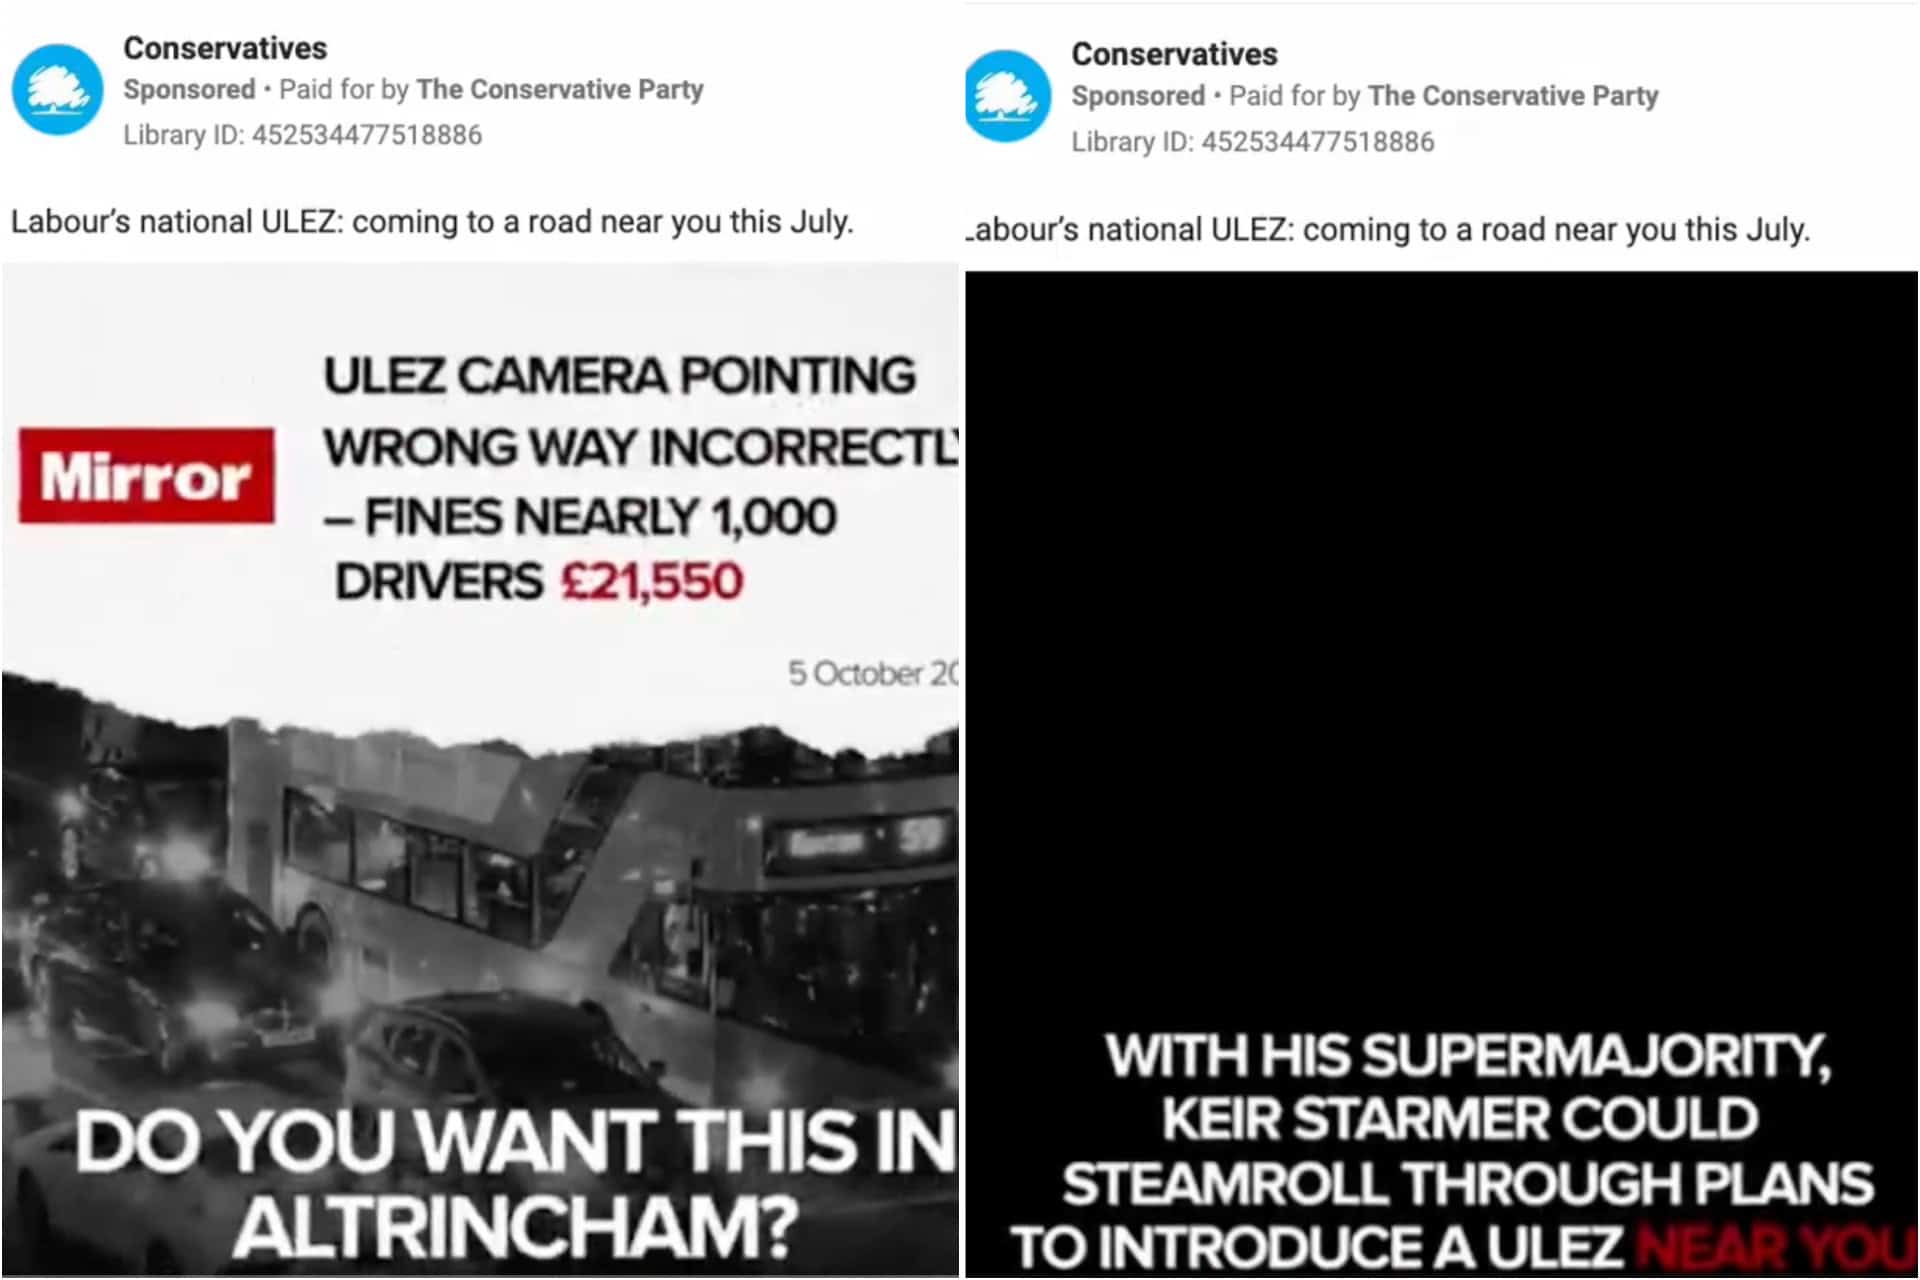 It’s Brexit all over again: Tories blitz Facebook with ads warning of a ‘national ULEZ’